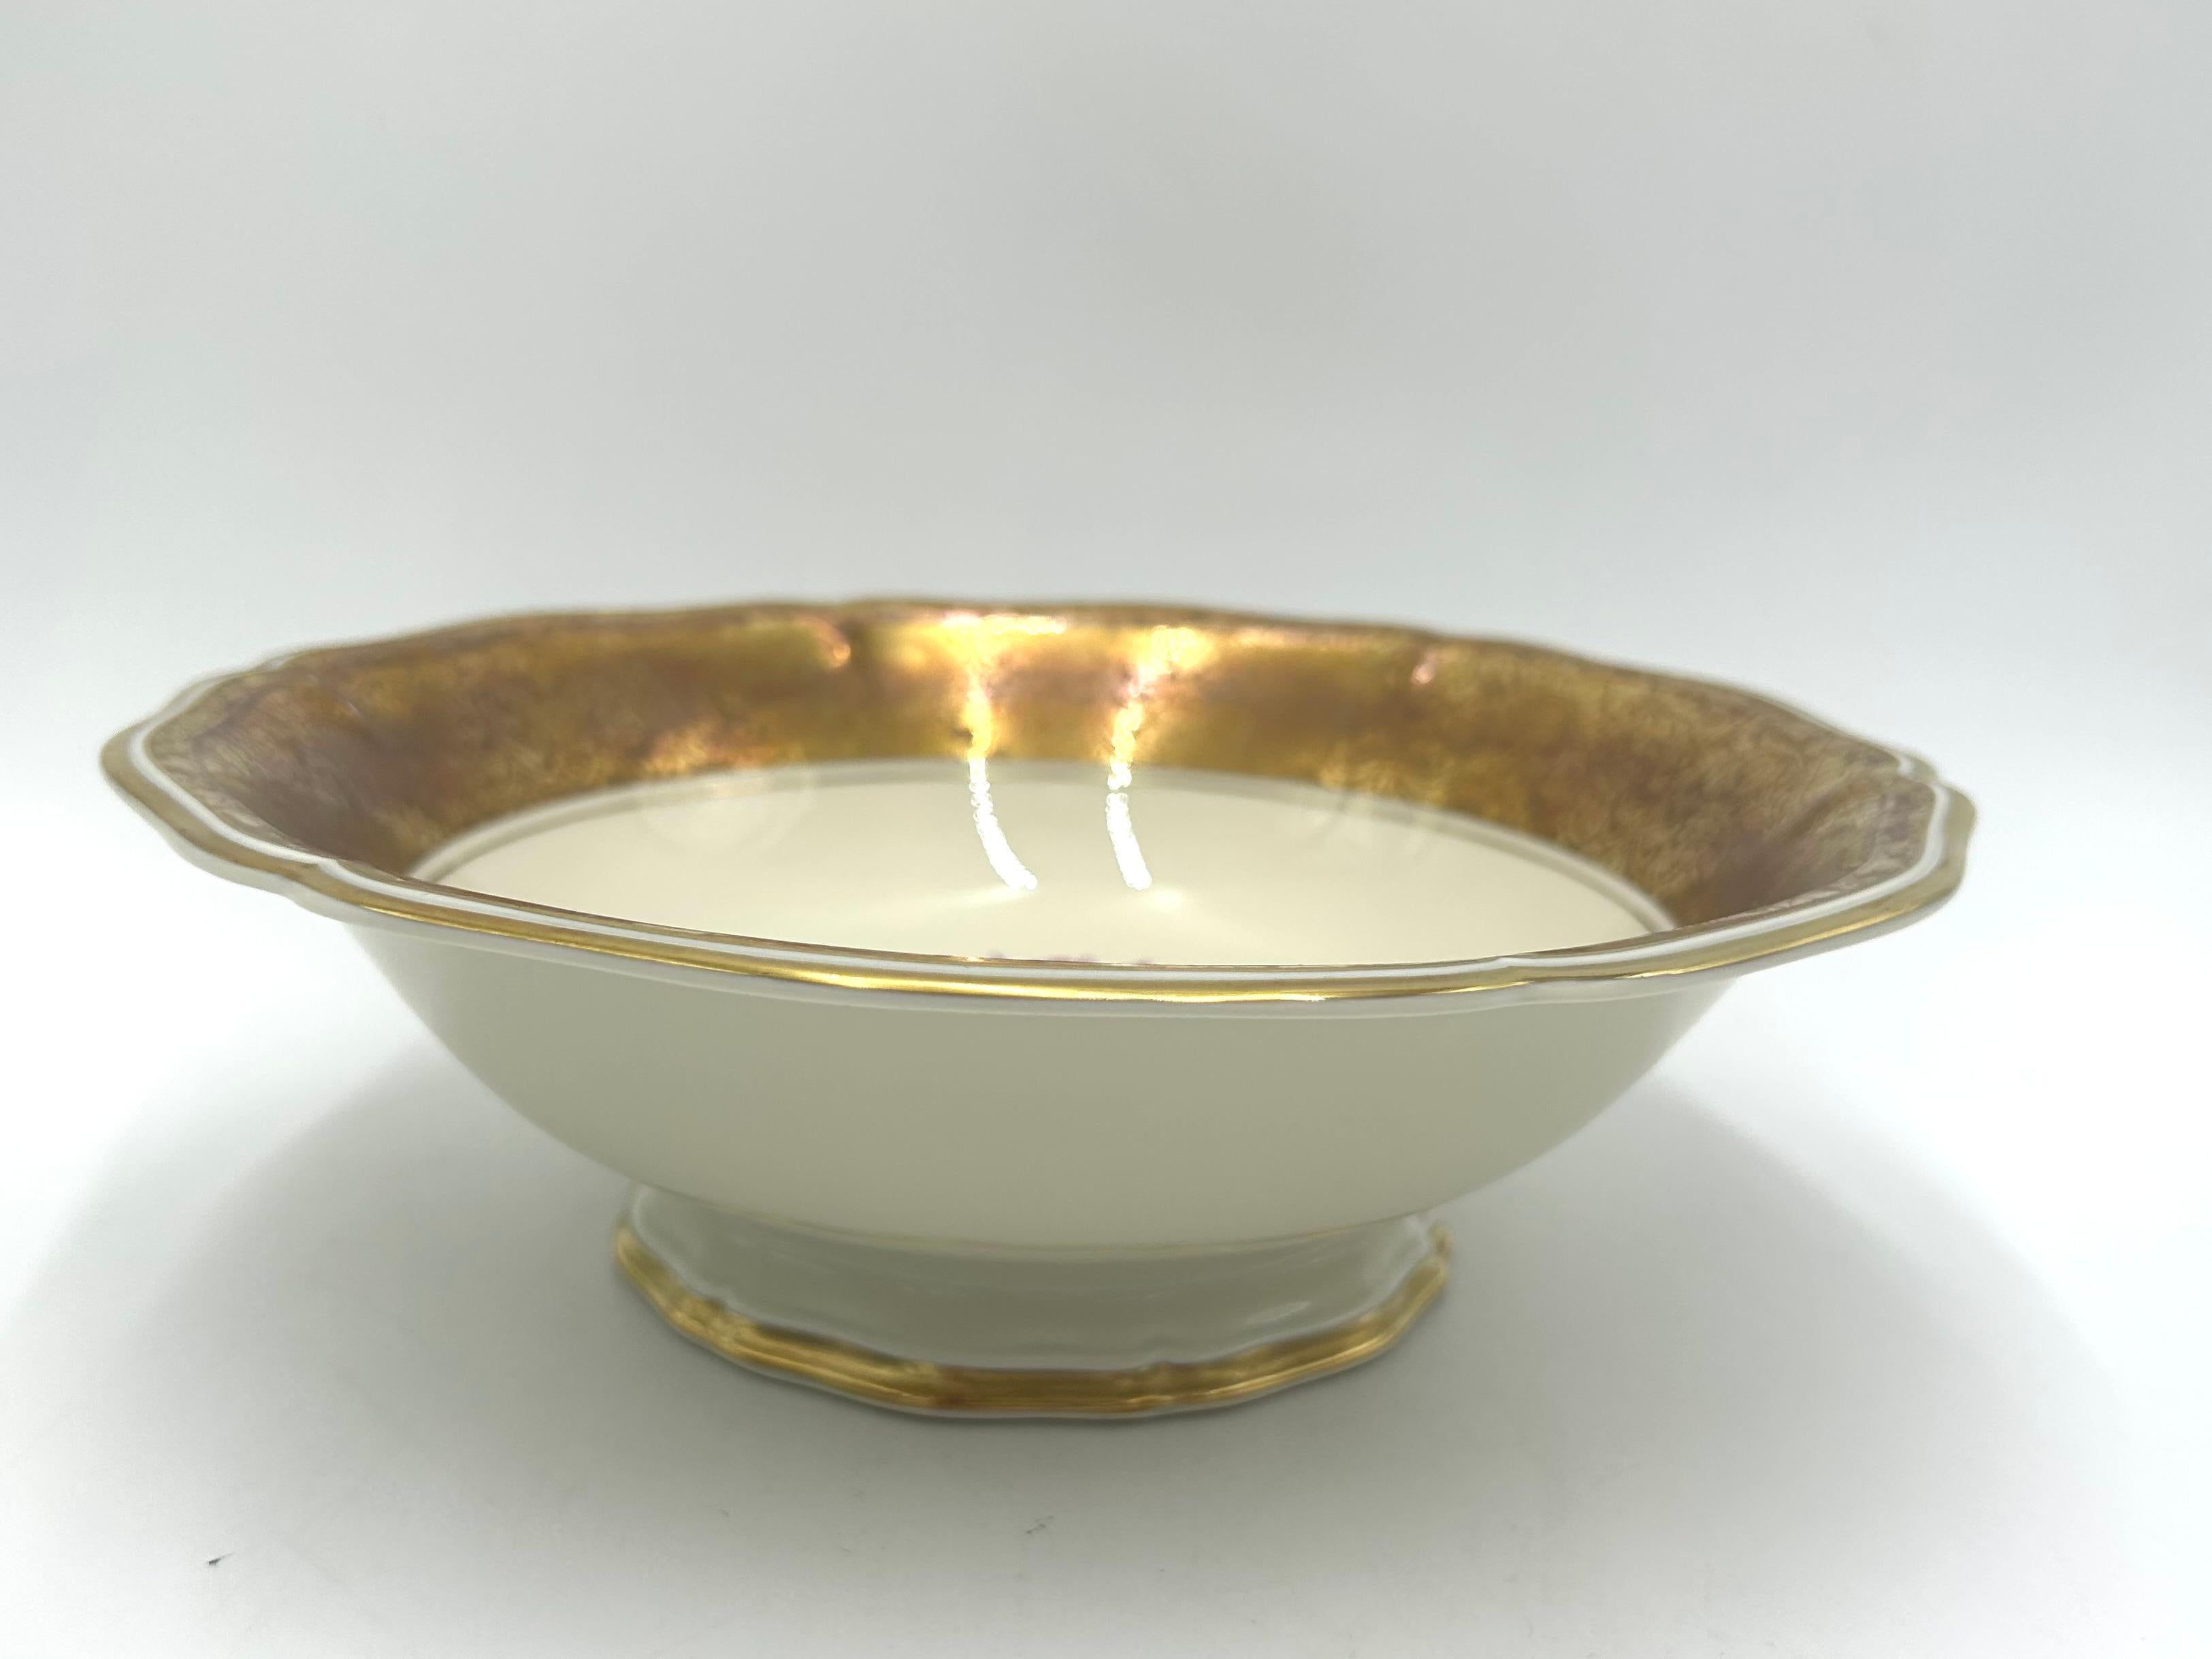 Beautiful porcelain platter-bowl in ecru color decorated with gilding and a floral motif

A product of the valued German Rosenthal label, marked with a mark used in the 1940s.

A platter from the classic, beautiful Chippendale series. Very good